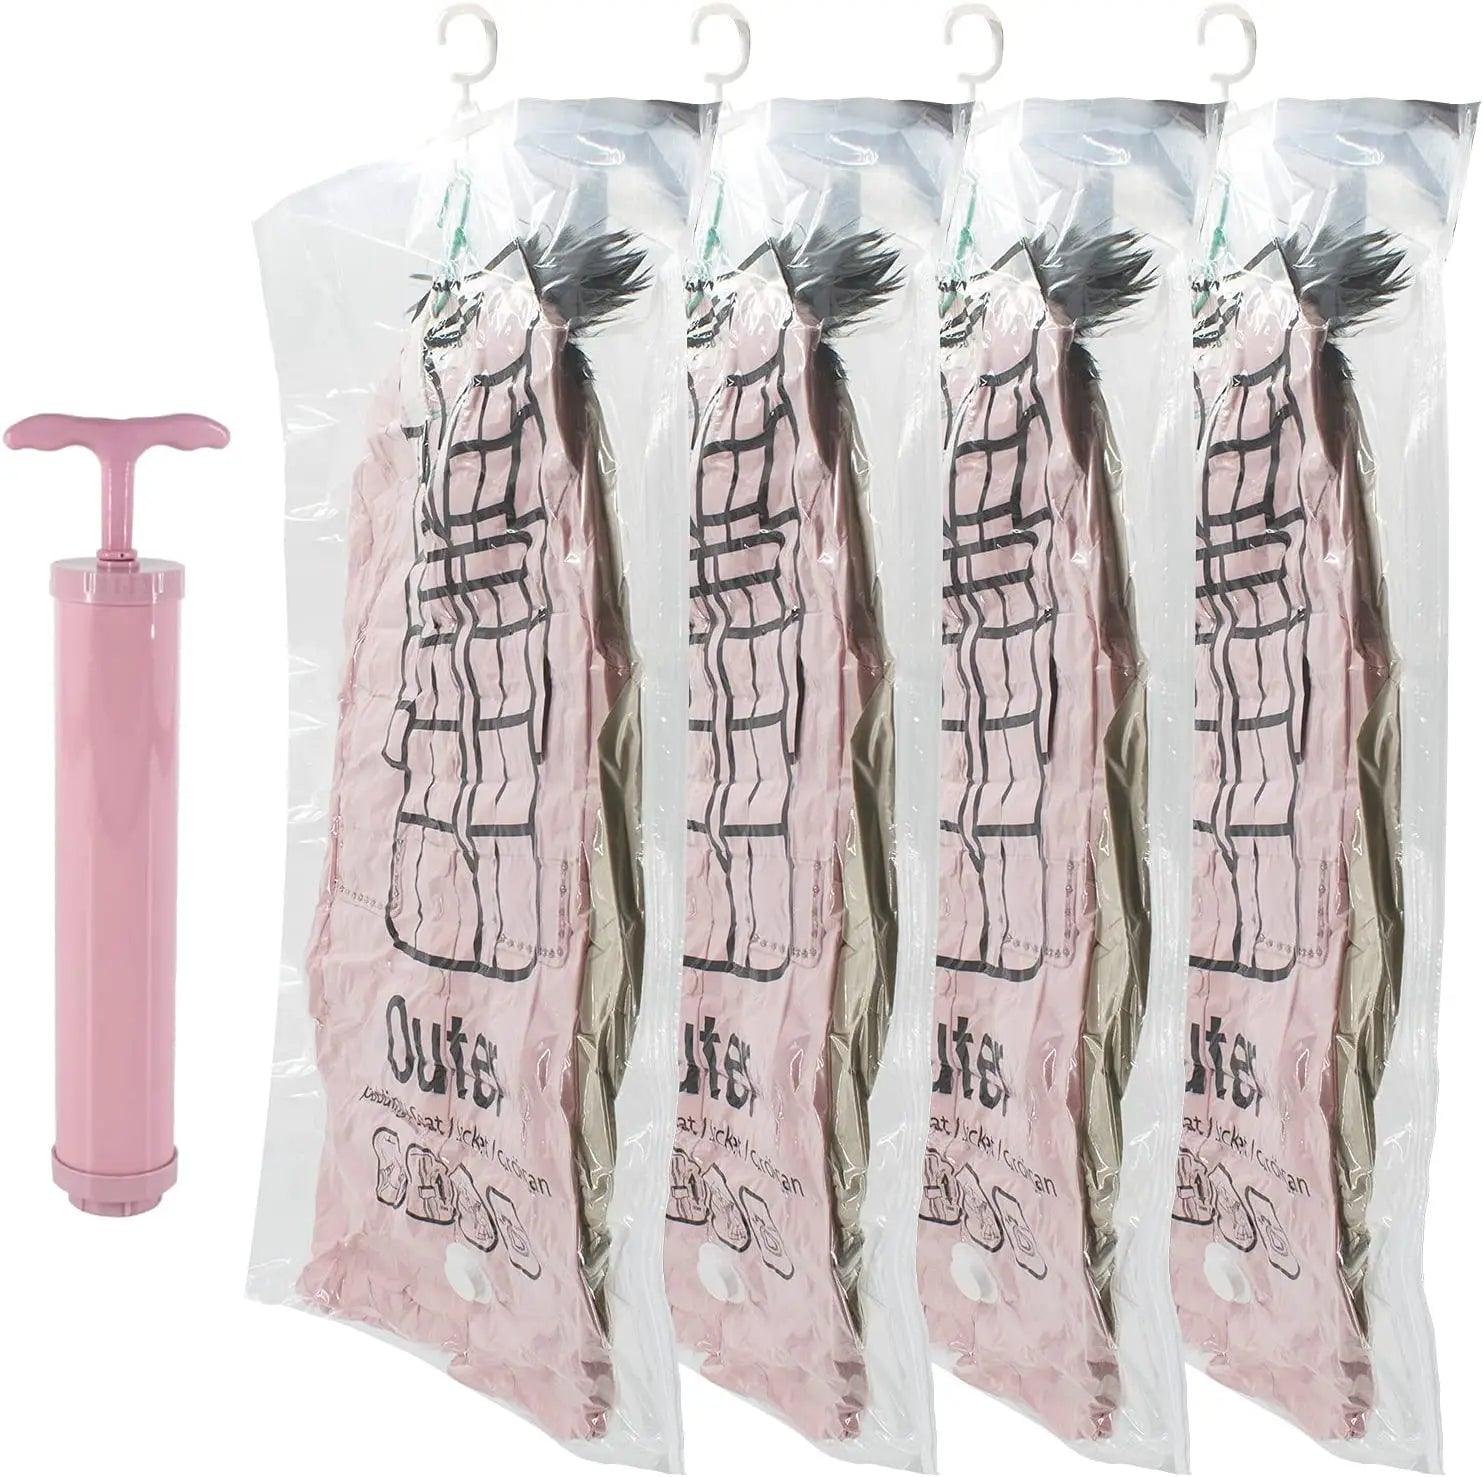 Space-Saving Hanging Vacuum Storage Bags for Suits, Coats, Jackets - Closet Organization Solution  ourlum.com   